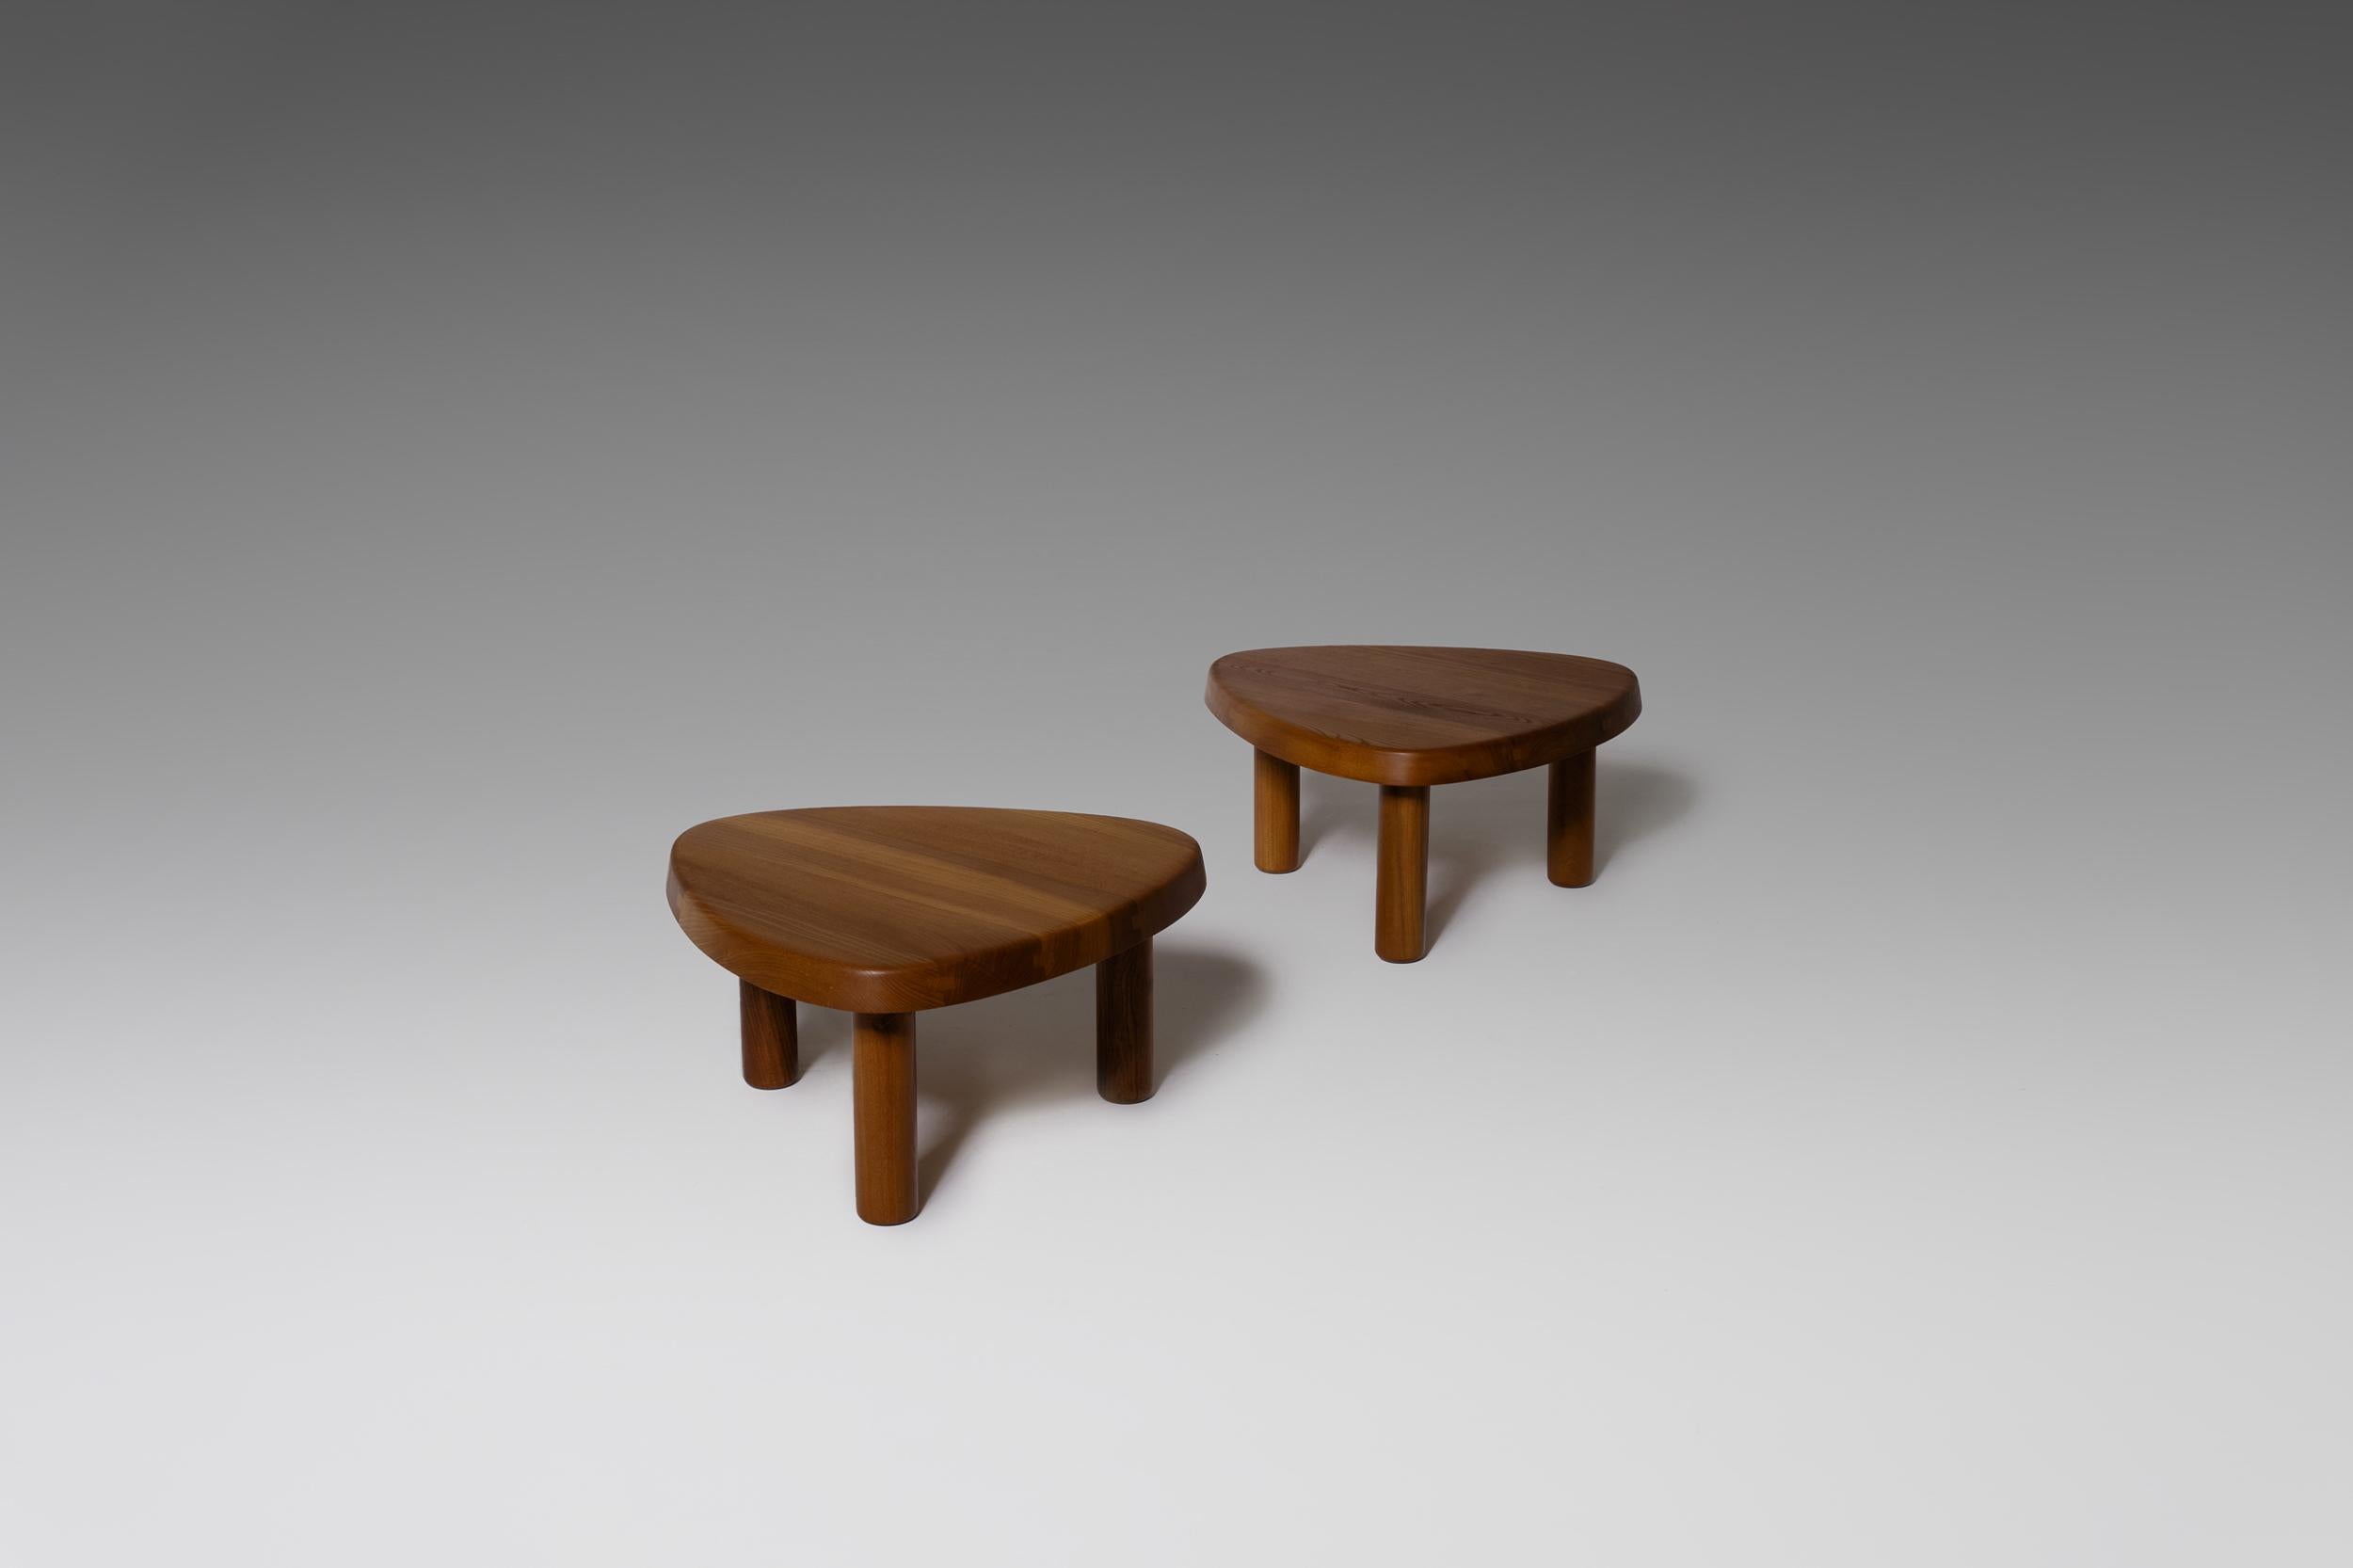 Rare set of two 'T23' side tables in solid Elm by Pierre Chapo, France, 1960s. Remarkable design made of a wam colored elm wood with a beautiful exposed grain, giving them a rich, warm and natural look. The organic 'plectrum' shaped table tops have